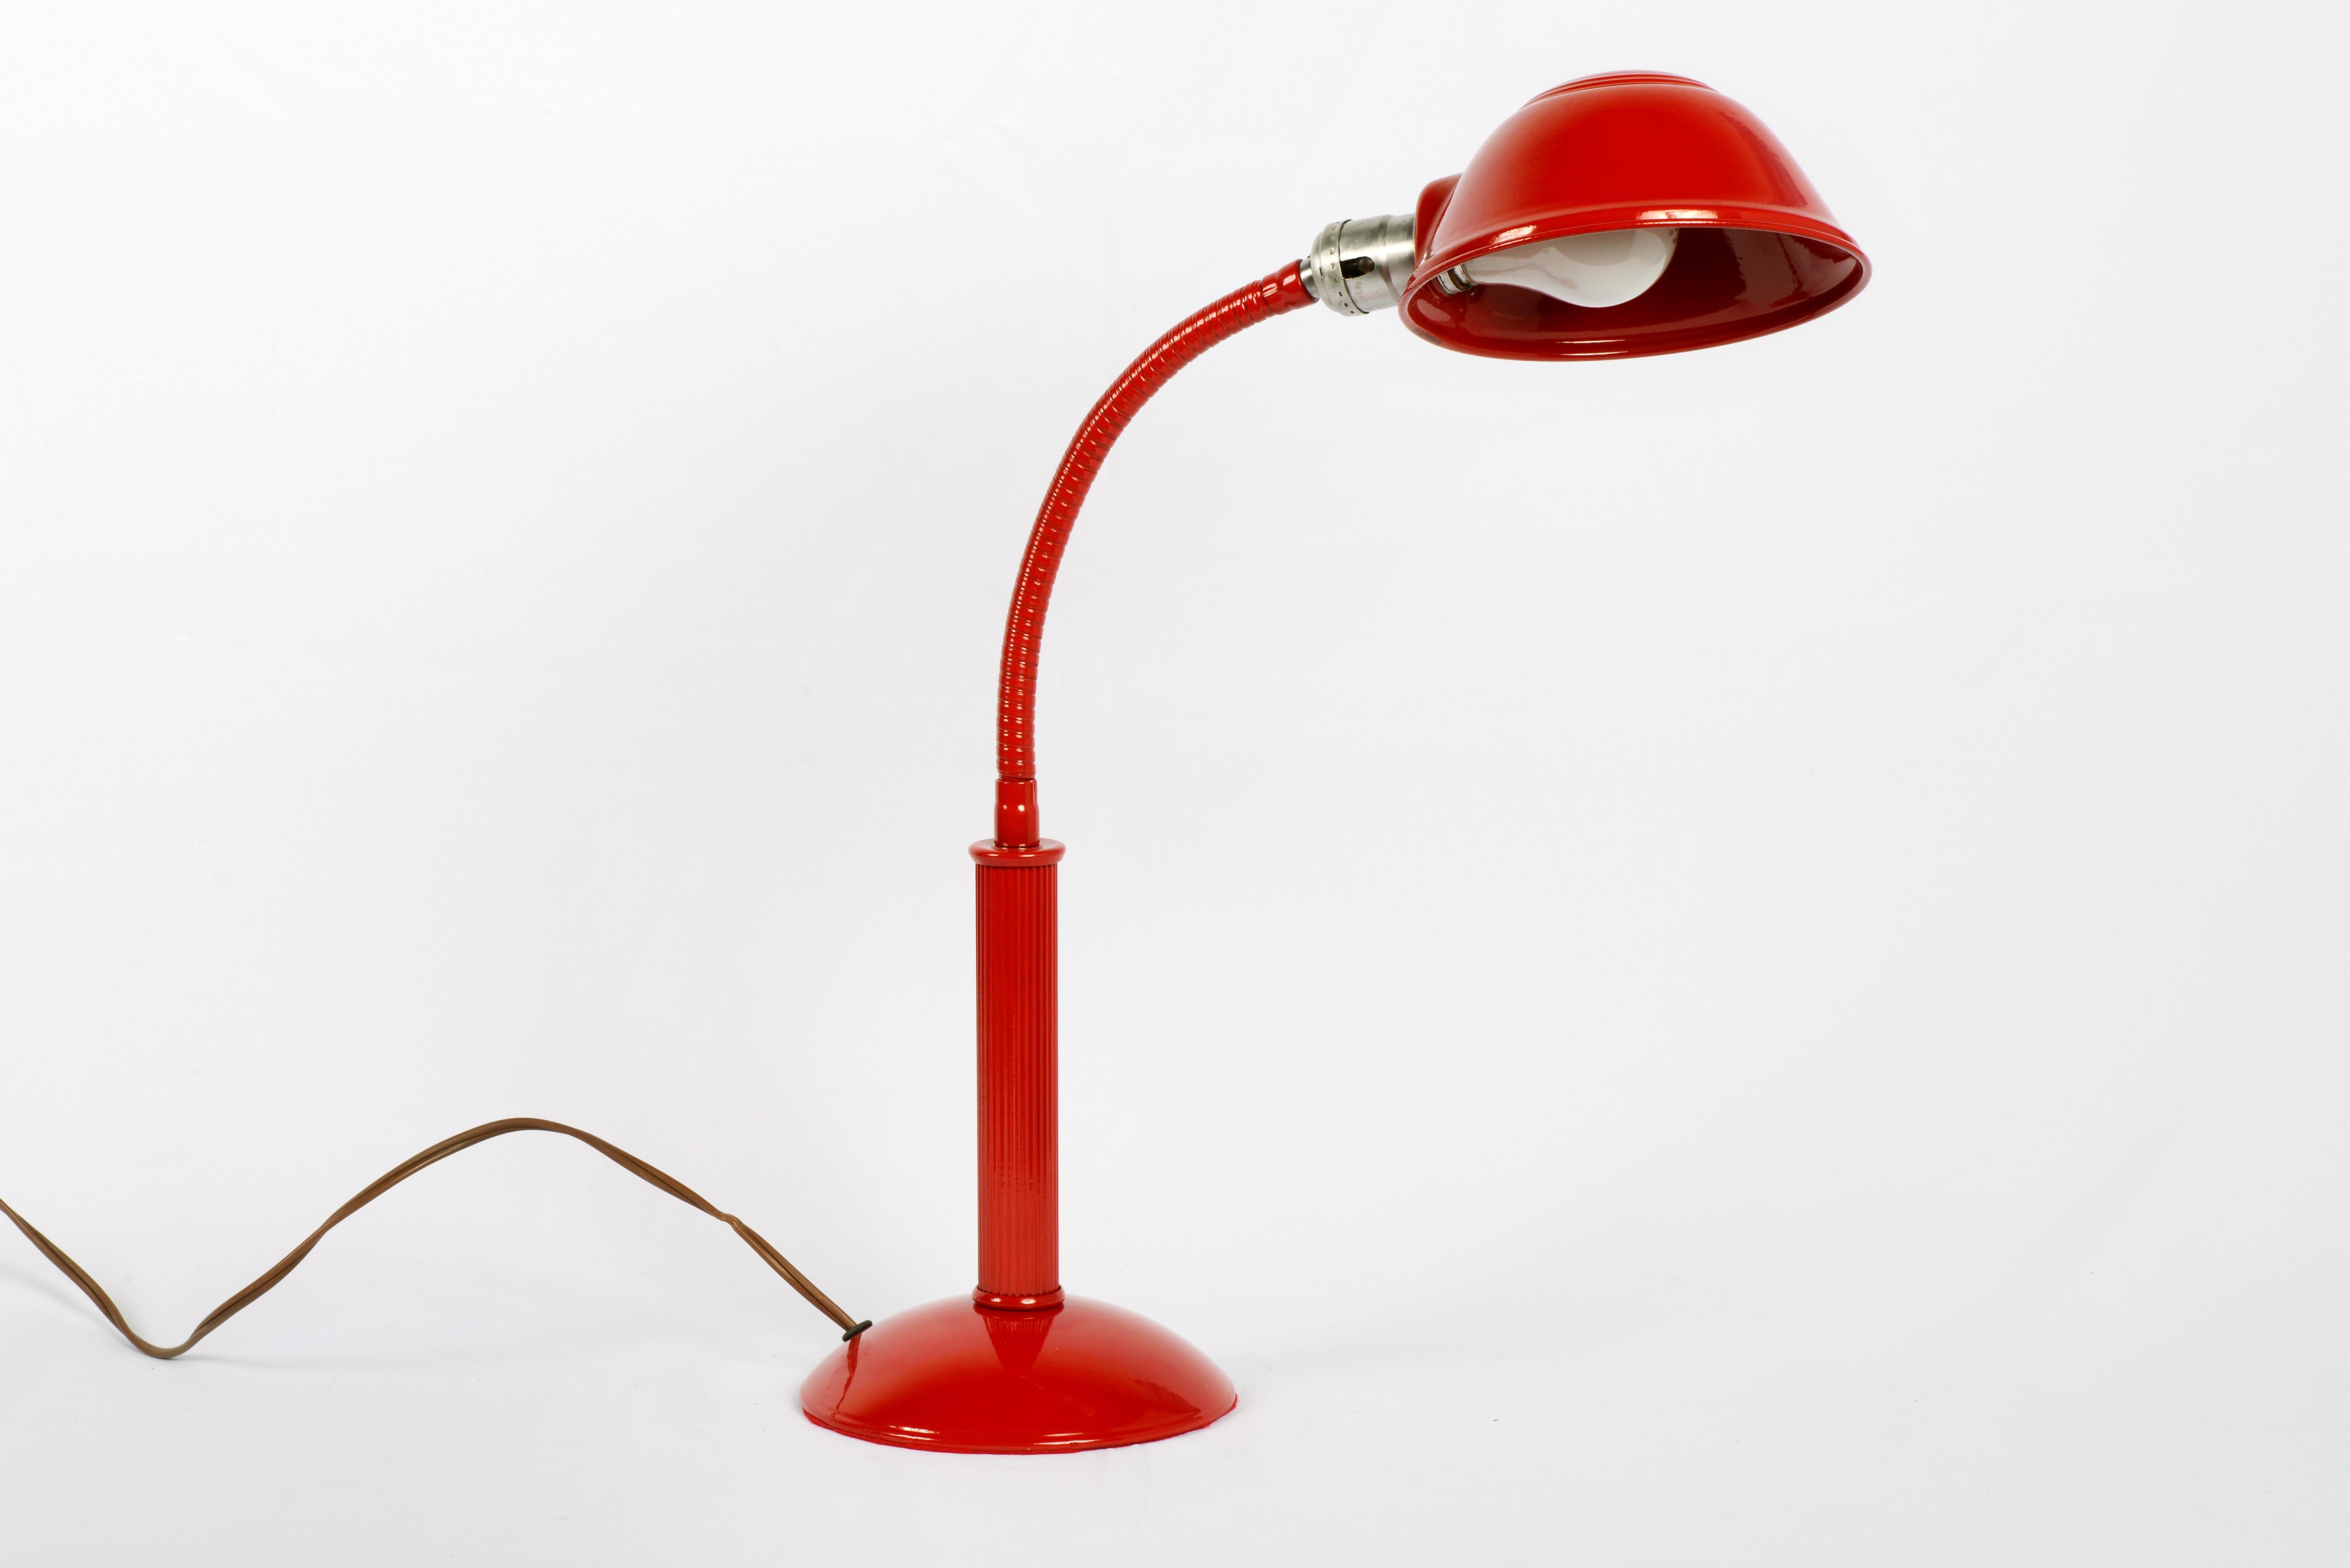 Put a little light on the subject with this fully functional retro gooseneck lamp from the 1960s. Refinished in a powder-coated pop of fire engine red (RD01), this totally unique accessory is sure to bring some cheer to your office space.